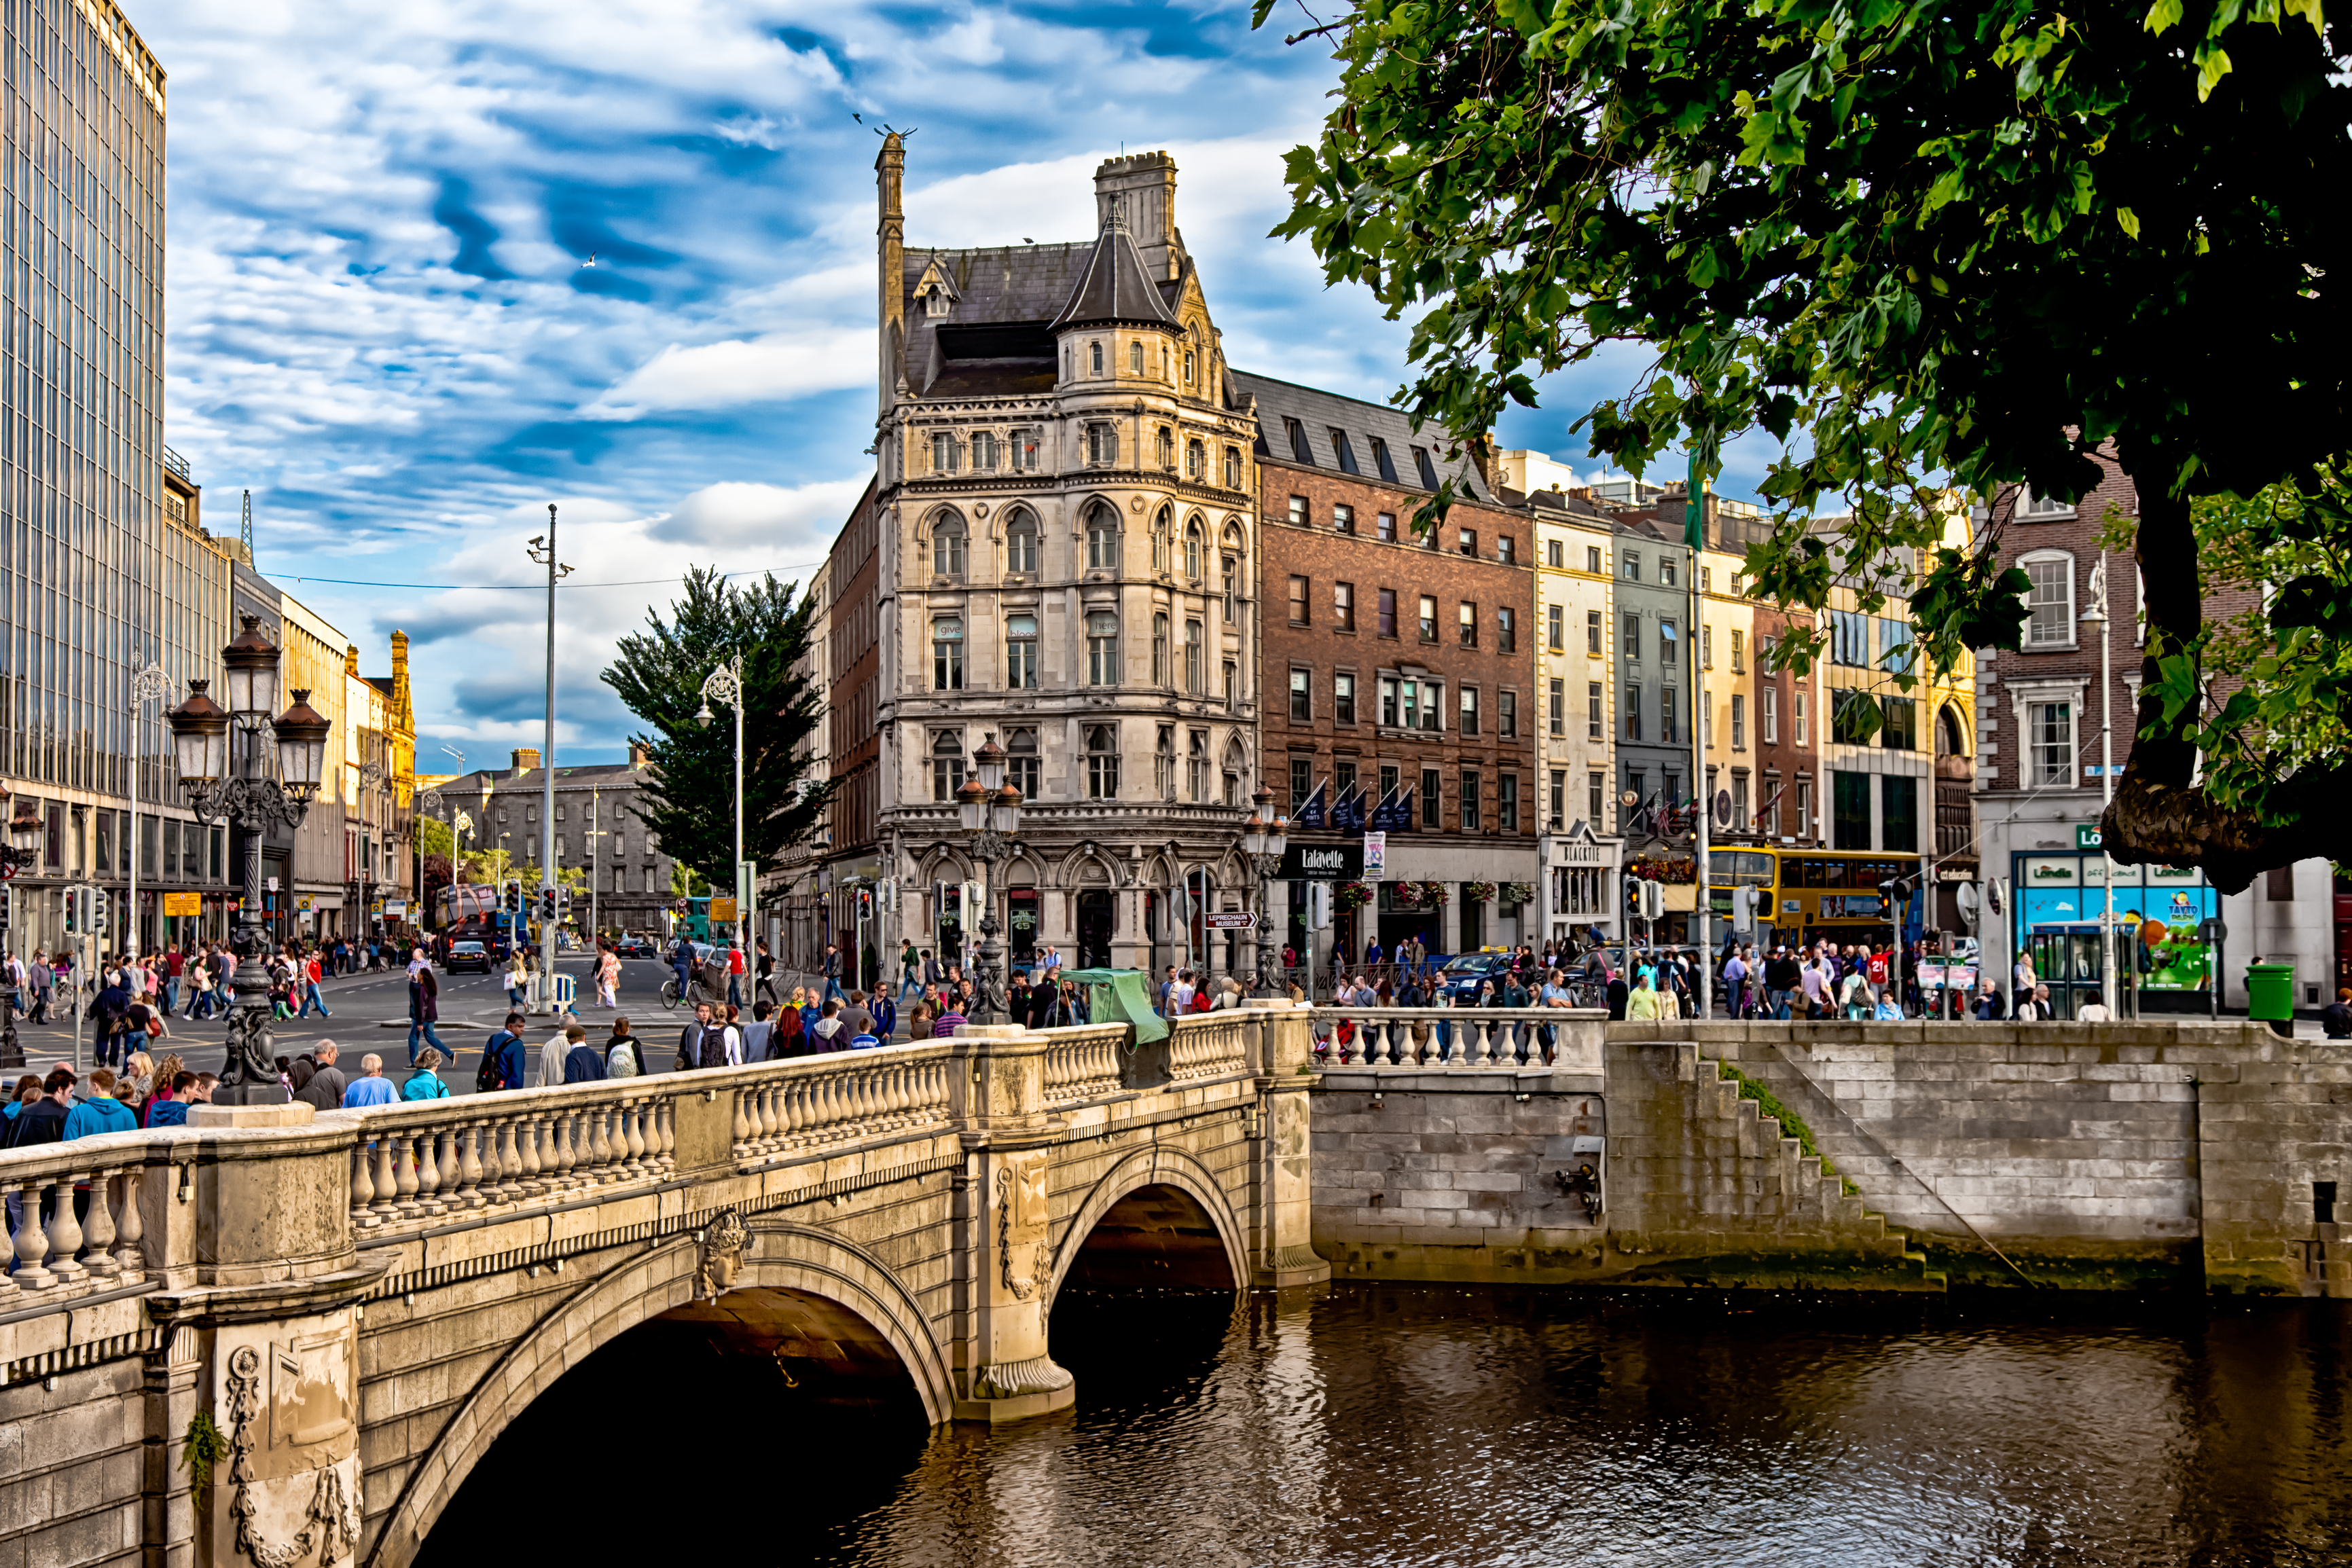 Play Airlines: Flights to Ireland from $325 round-trip